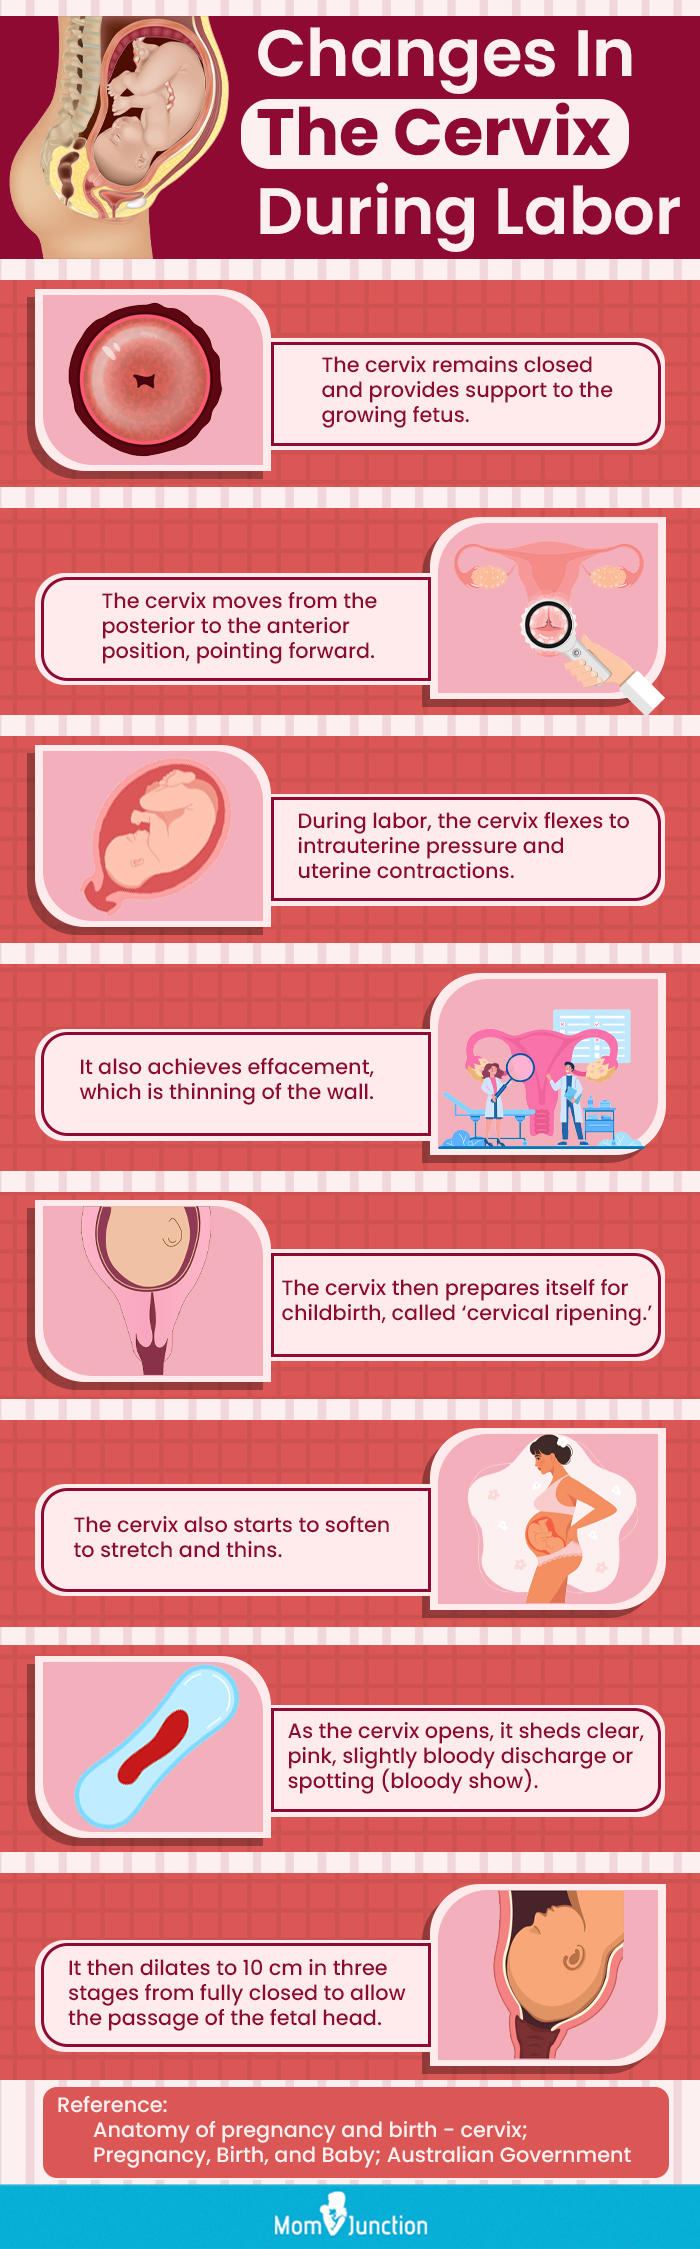 changes in the cervix during labor (infographic)